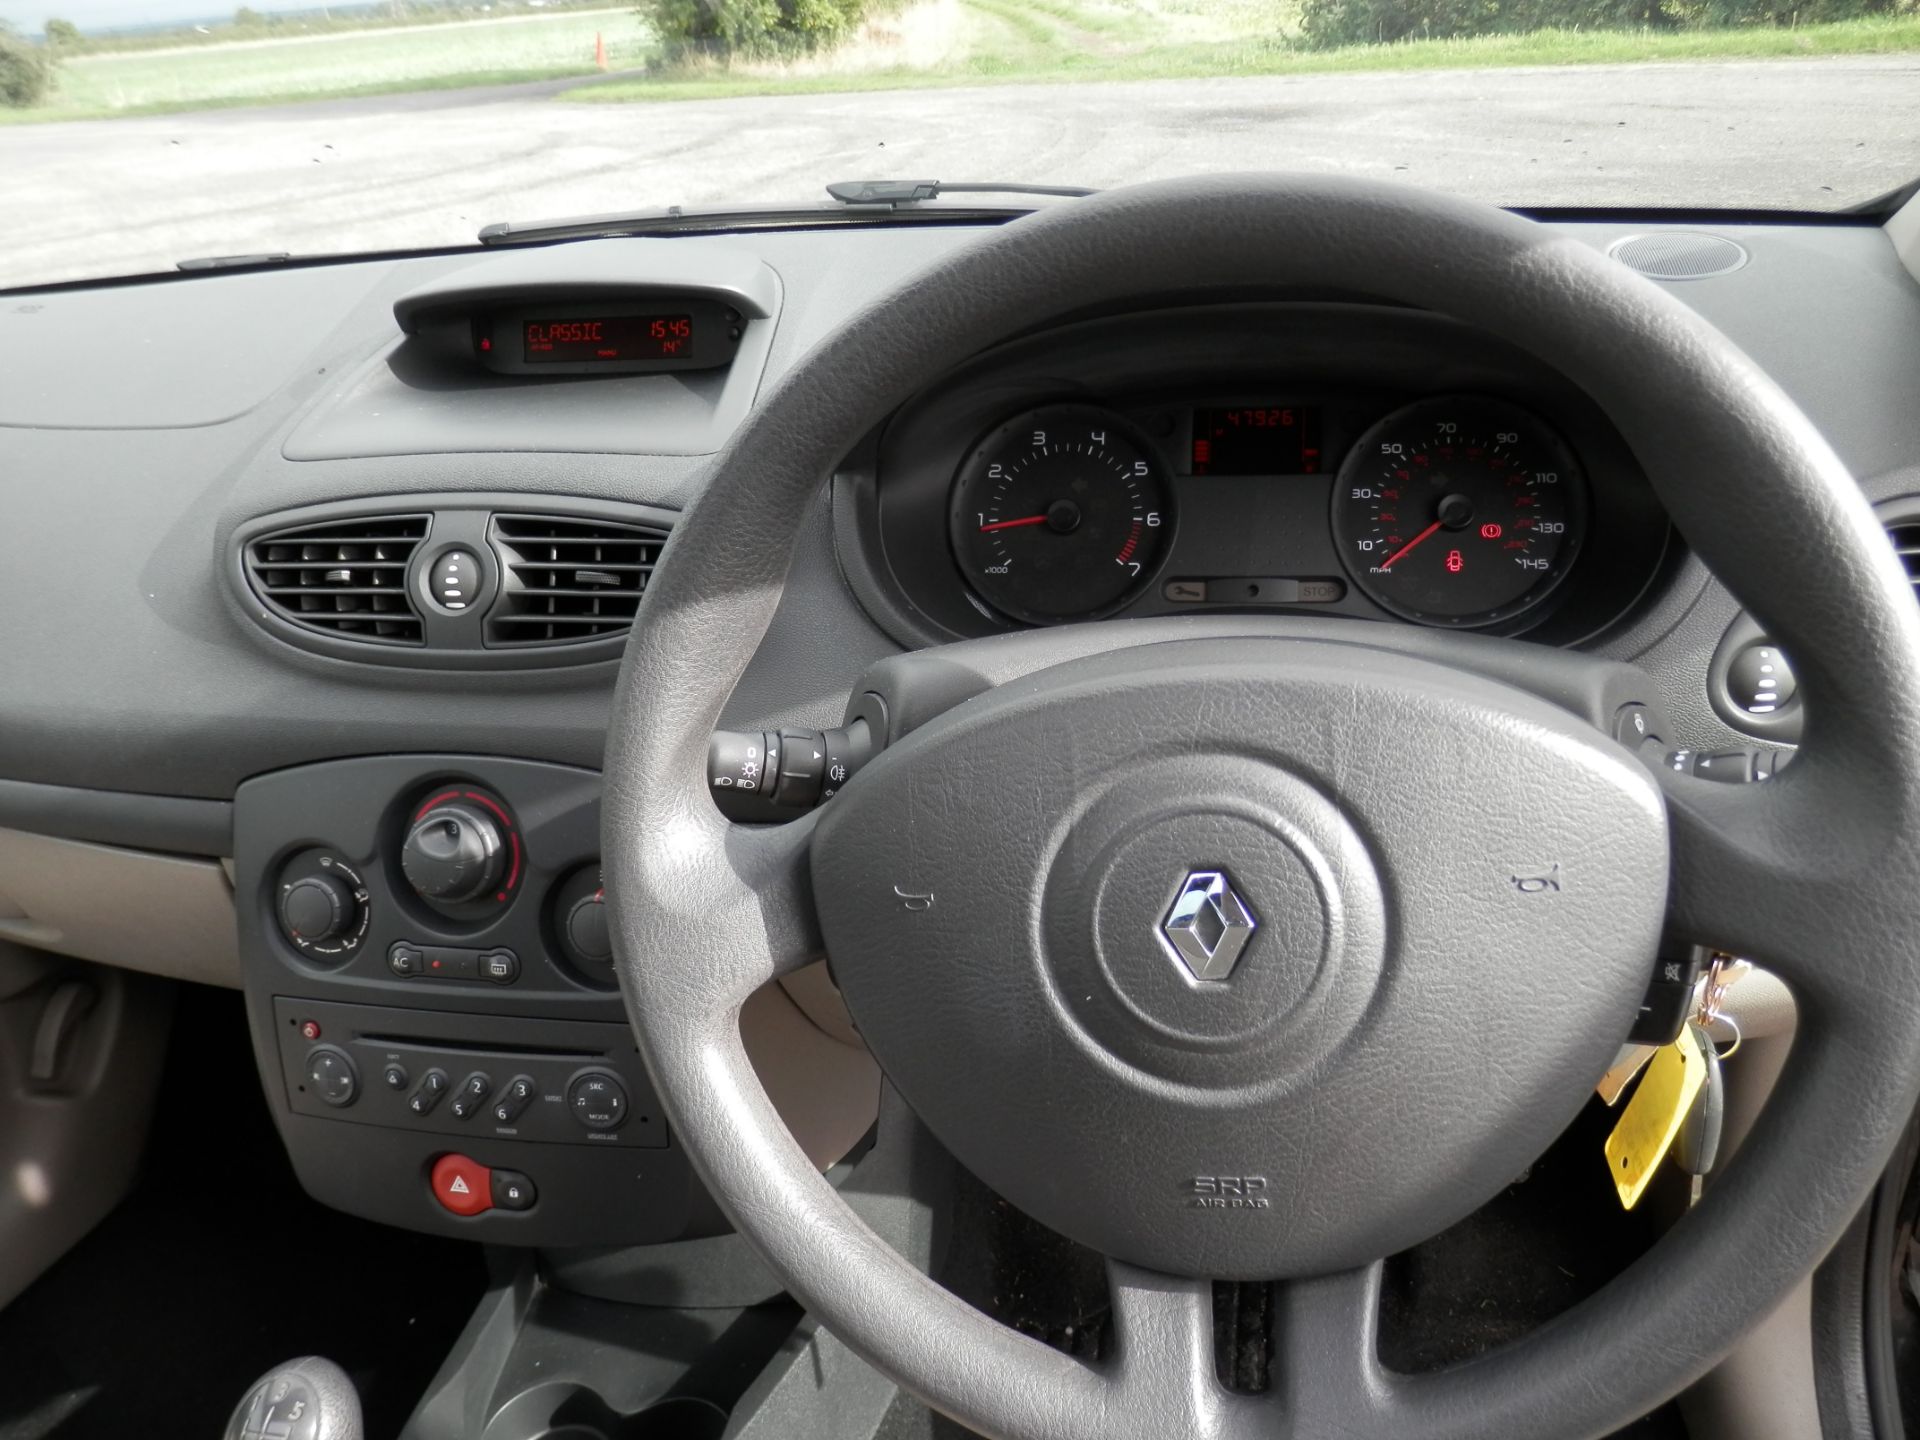 06/2006 RENAULT CLIO (FACELIFT MODEL) 1.4 EXPRESSION 16 VALVE, AIR CON, ONLY 47K MILES WARRANTED. - Image 13 of 26